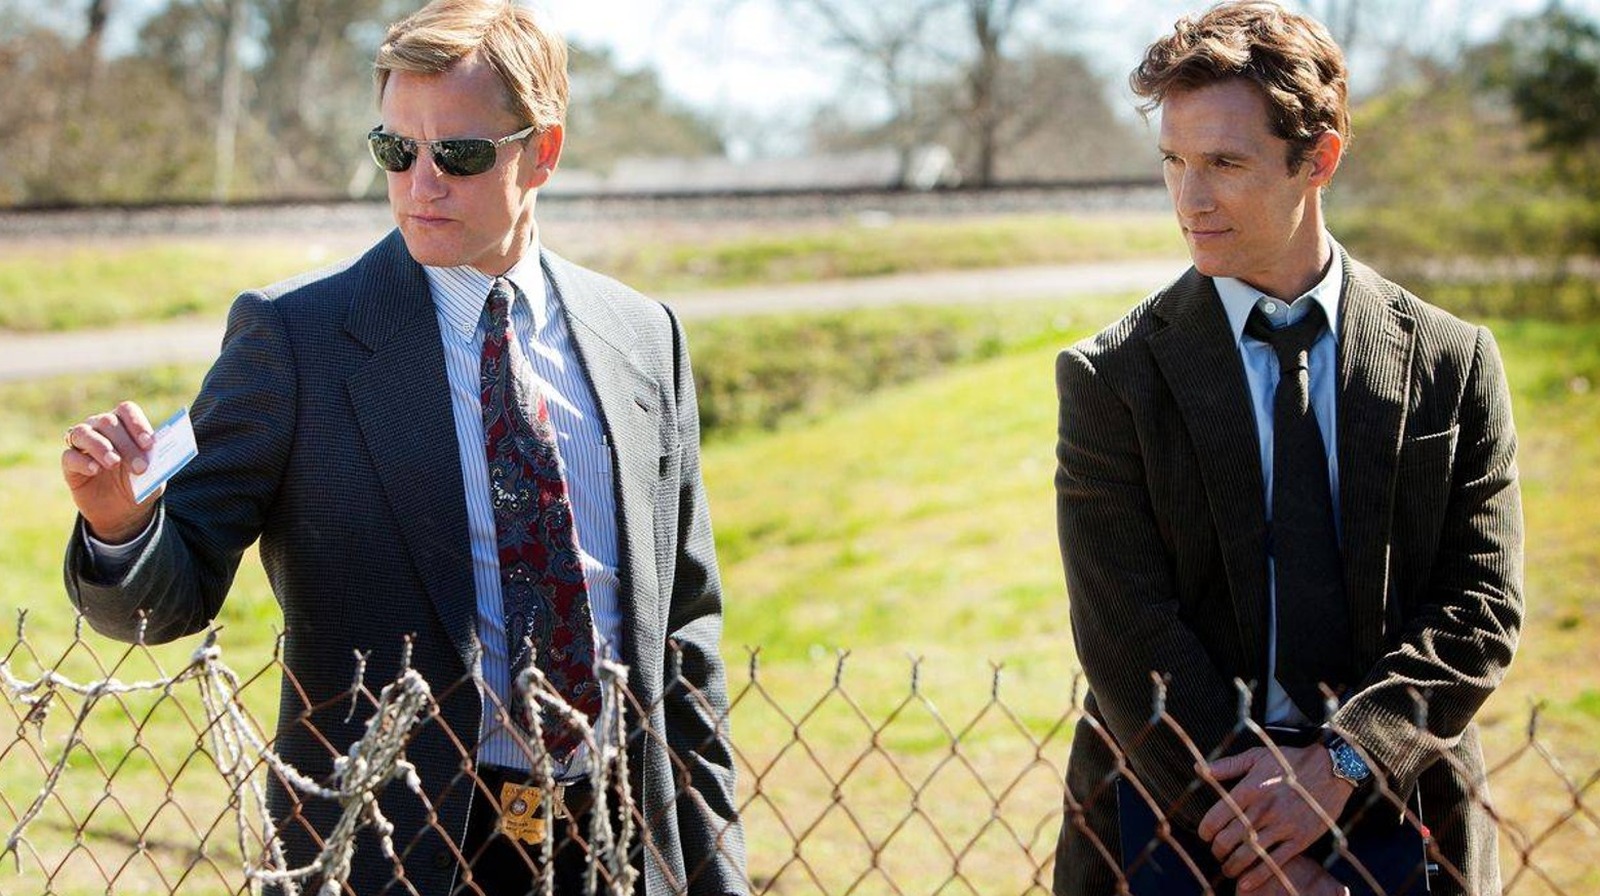 True Detective director wanted Matthew McConaughey for the role of Woody Harrelson